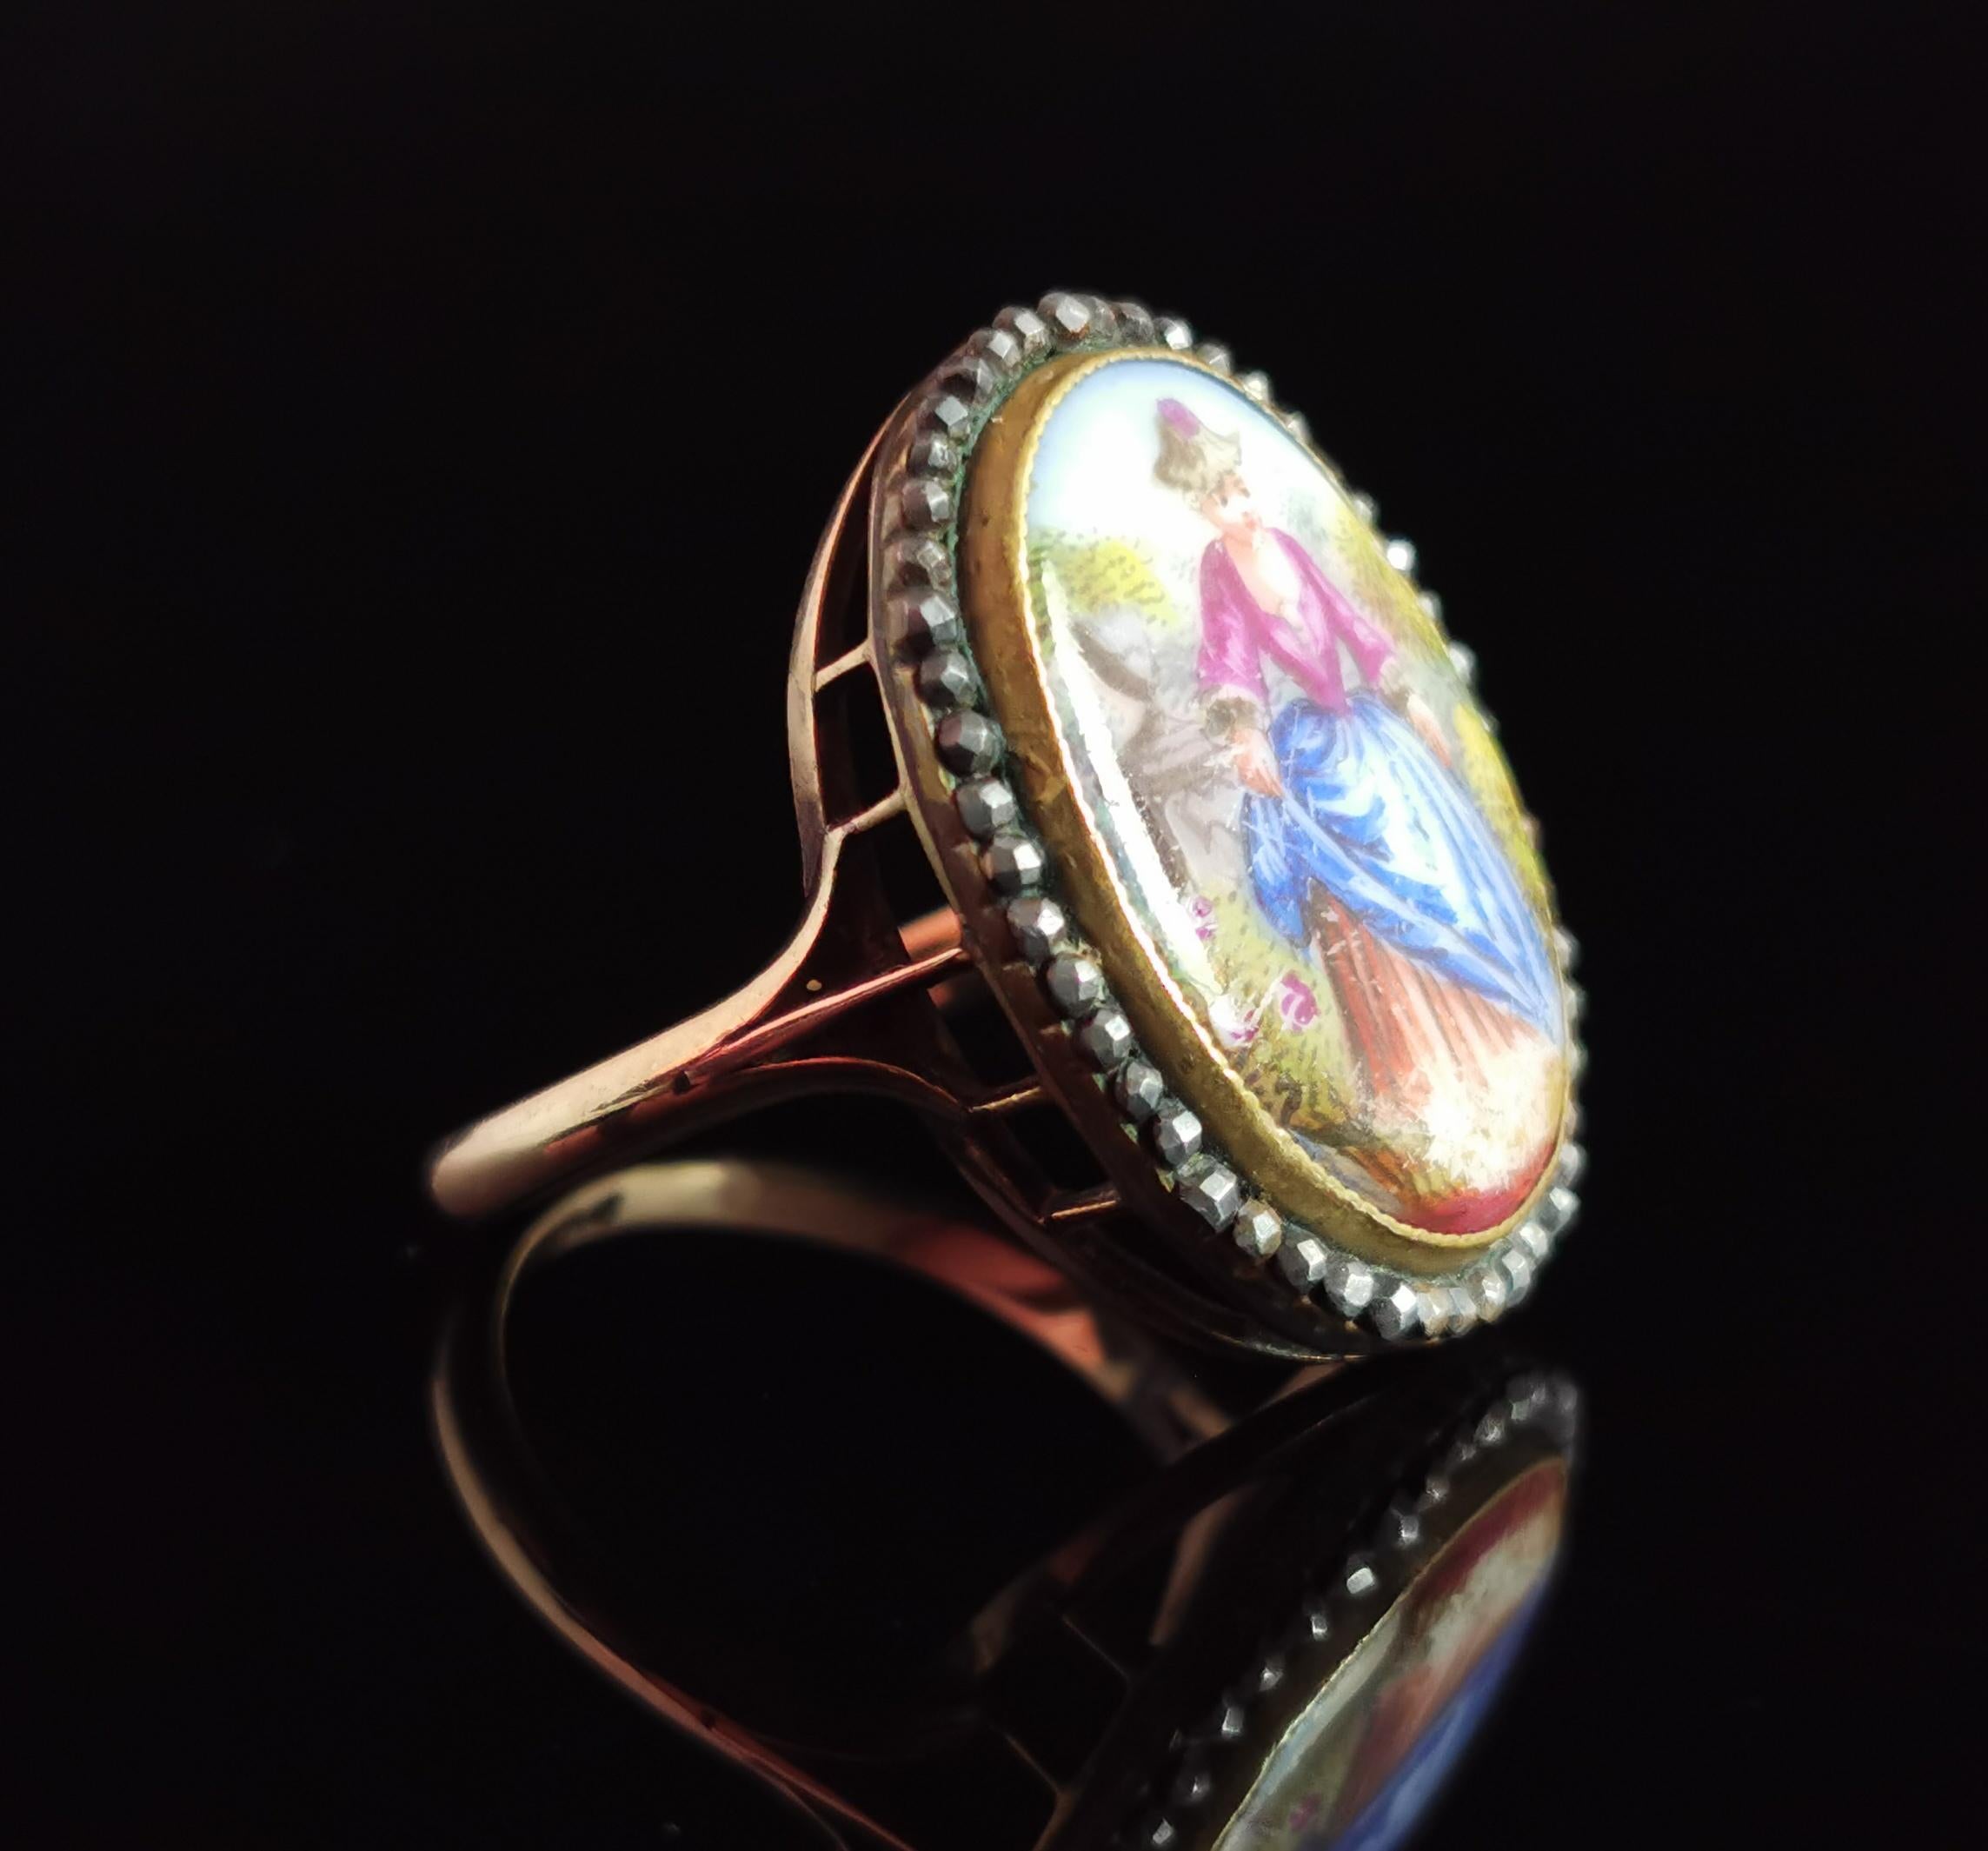 Romantic Antique Enamelled Portrait Ring, 9k Gold, Cut Steel and Mother of Pearl